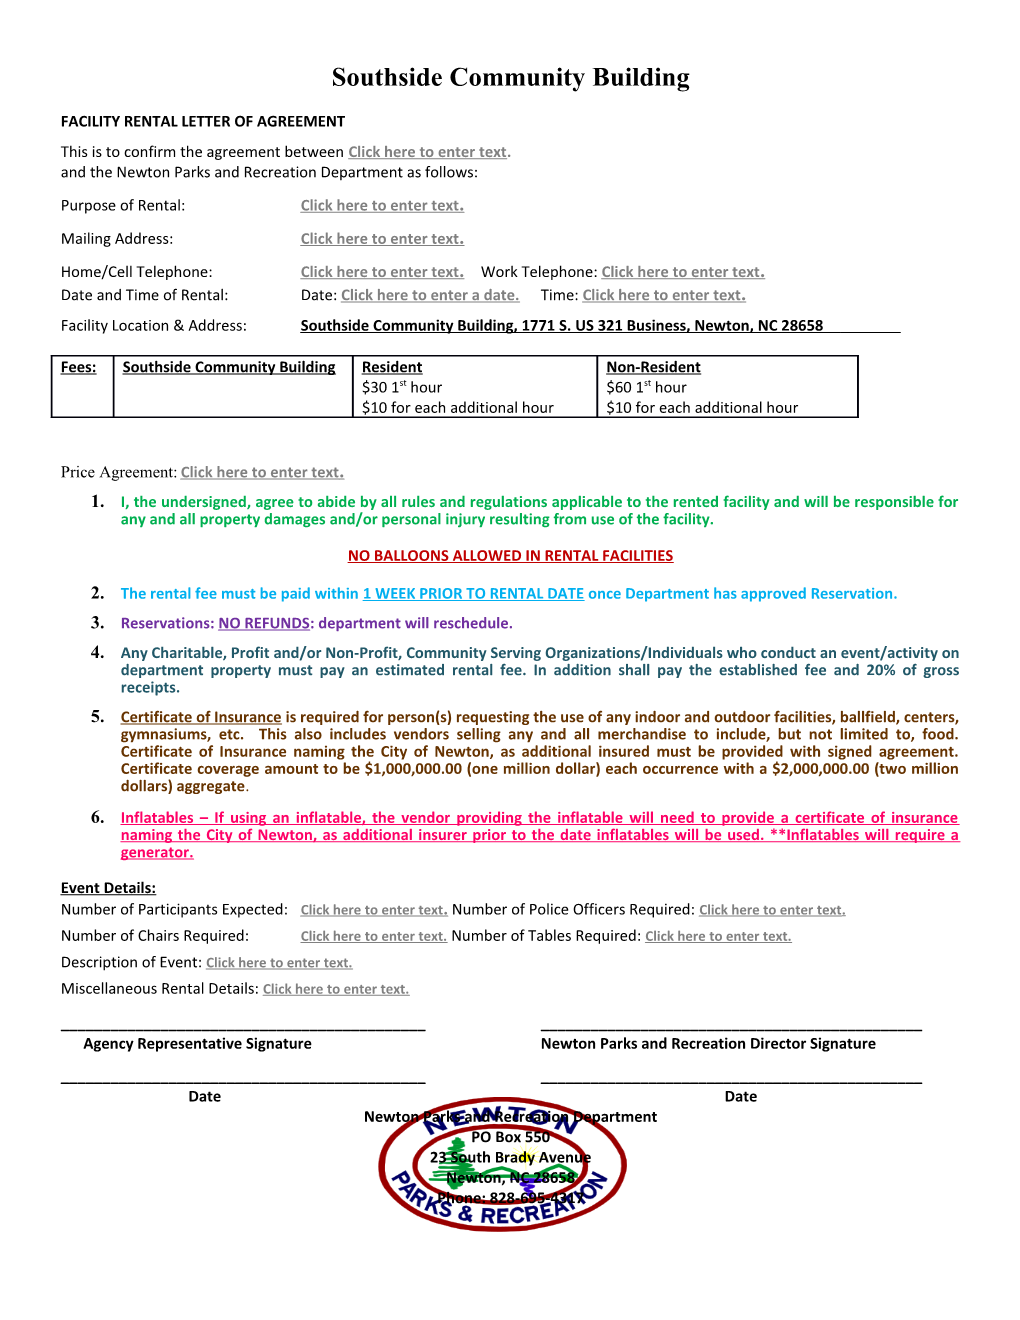 Facility Rental Letter of Agreement